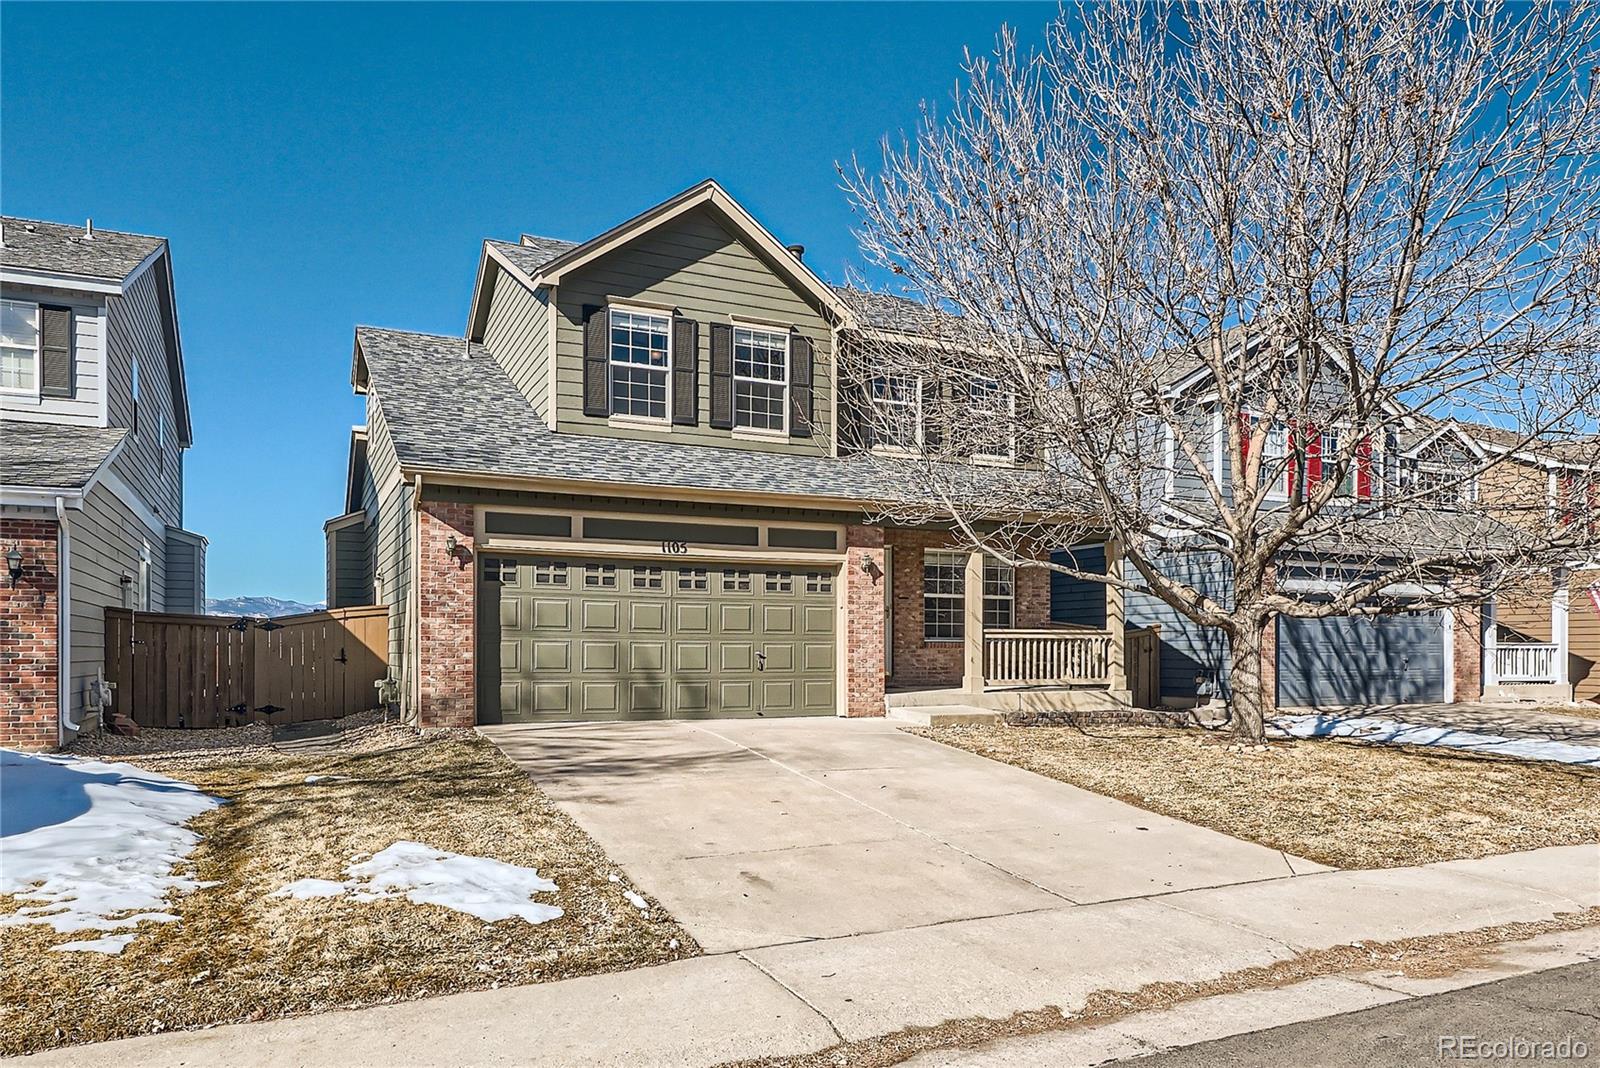 Report Image for 1105  Mulberry Lane,Highlands Ranch, Colorado